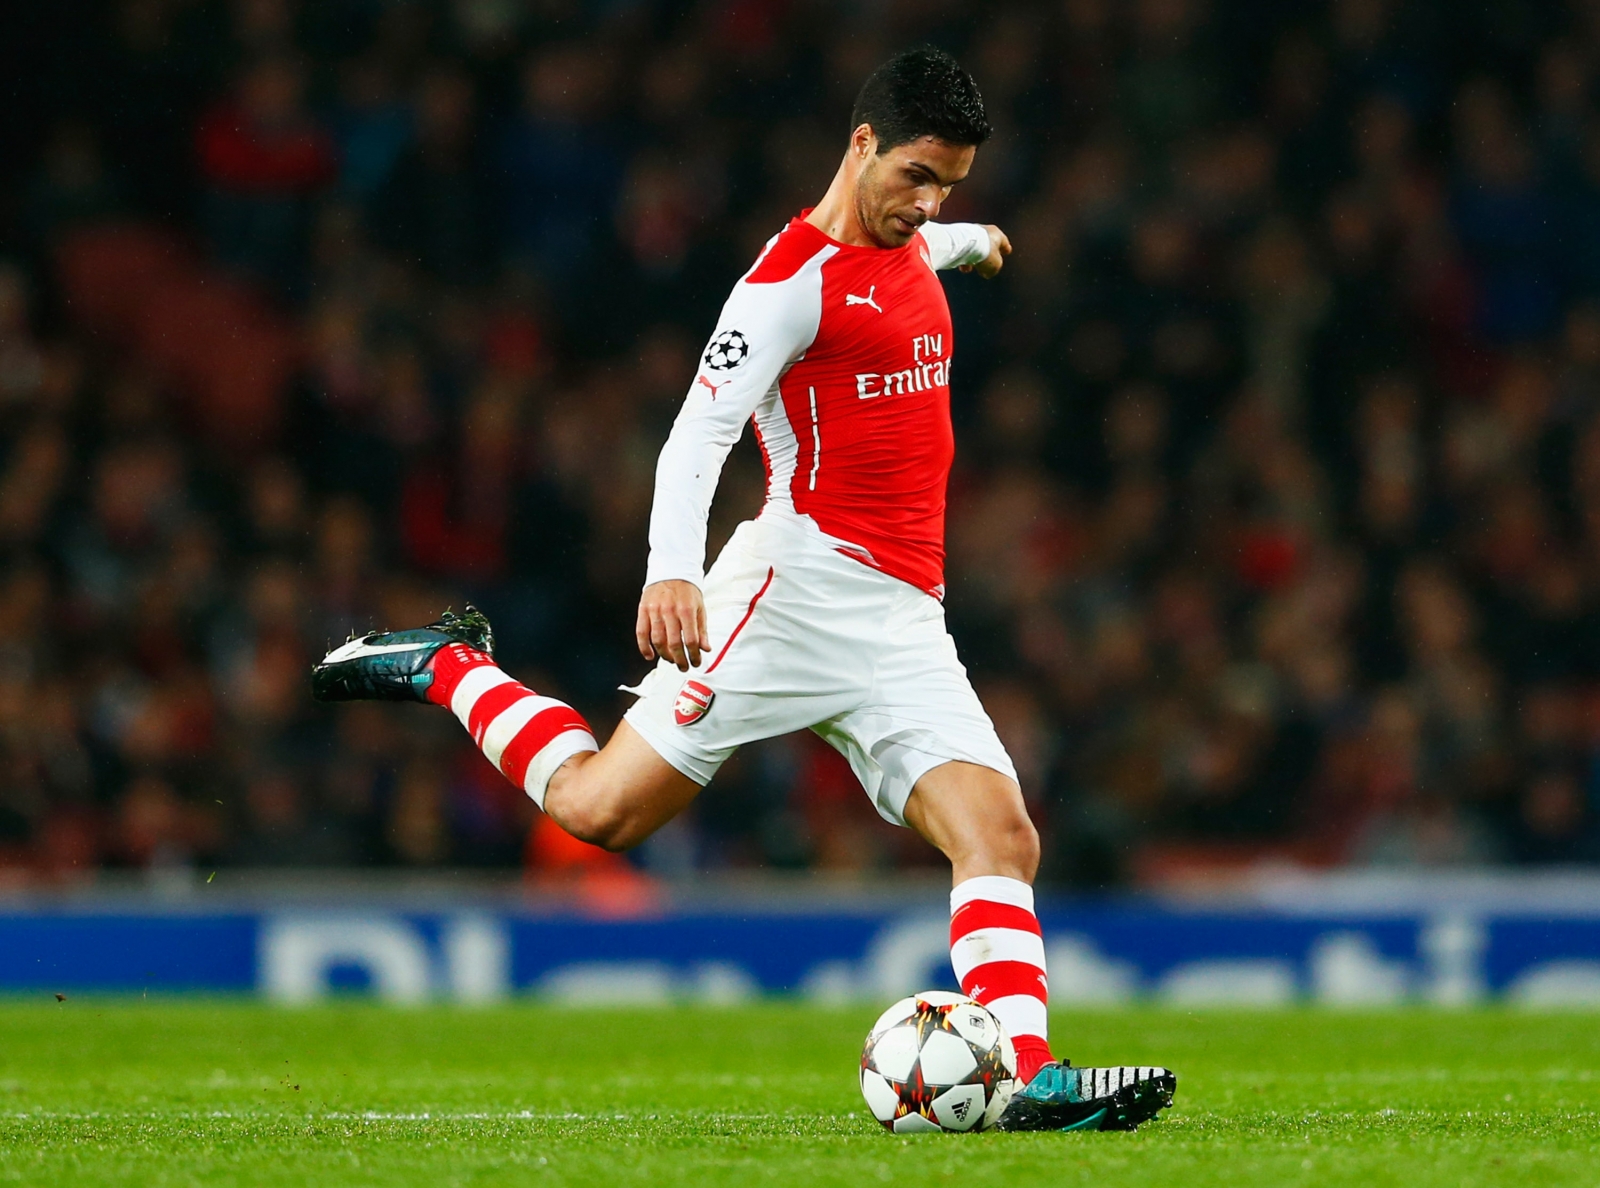 Mikel Arteta : Arsenal could accelerate Mikel Arteta appointment as ... - Arteta started out as a trainee with fc barcelona and was eventually loaned to.